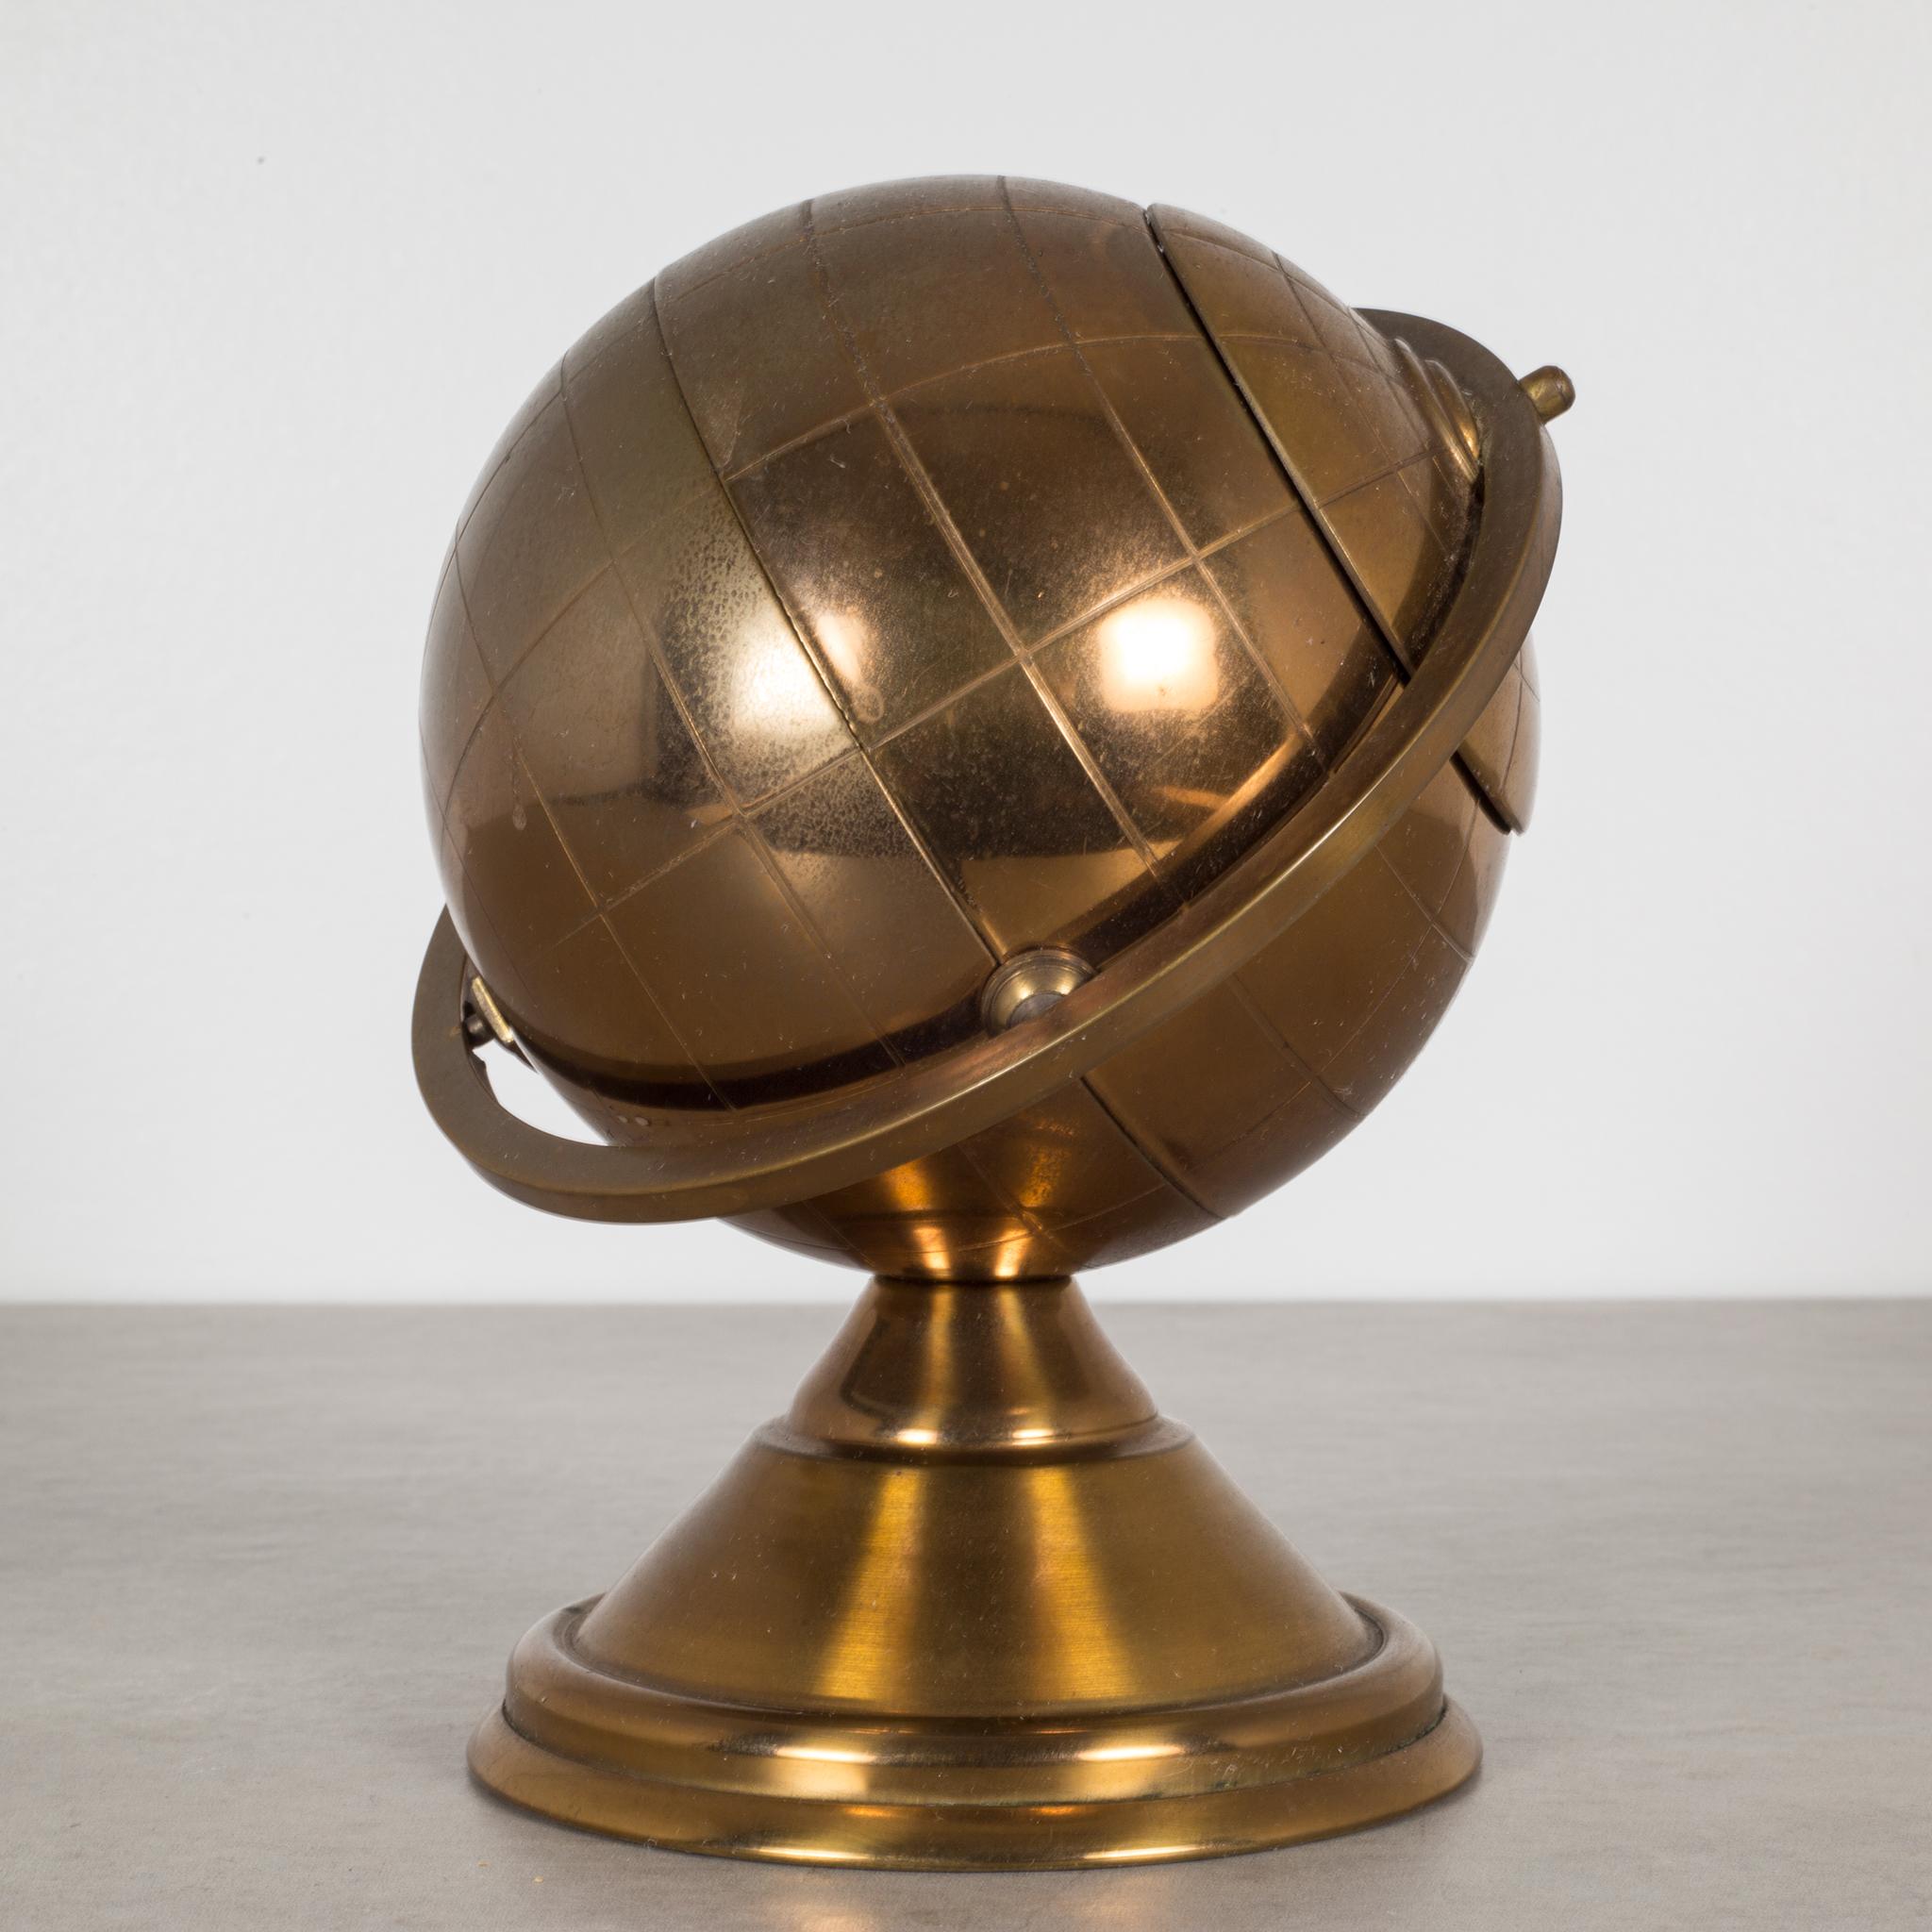 About

This is an original midcentury brass cigarette holder. The lid slides open on the globe's axis to reveal a metal interior designed to hold cigarettes.

This piece has retained its original finish and has the appropriate finish for the age